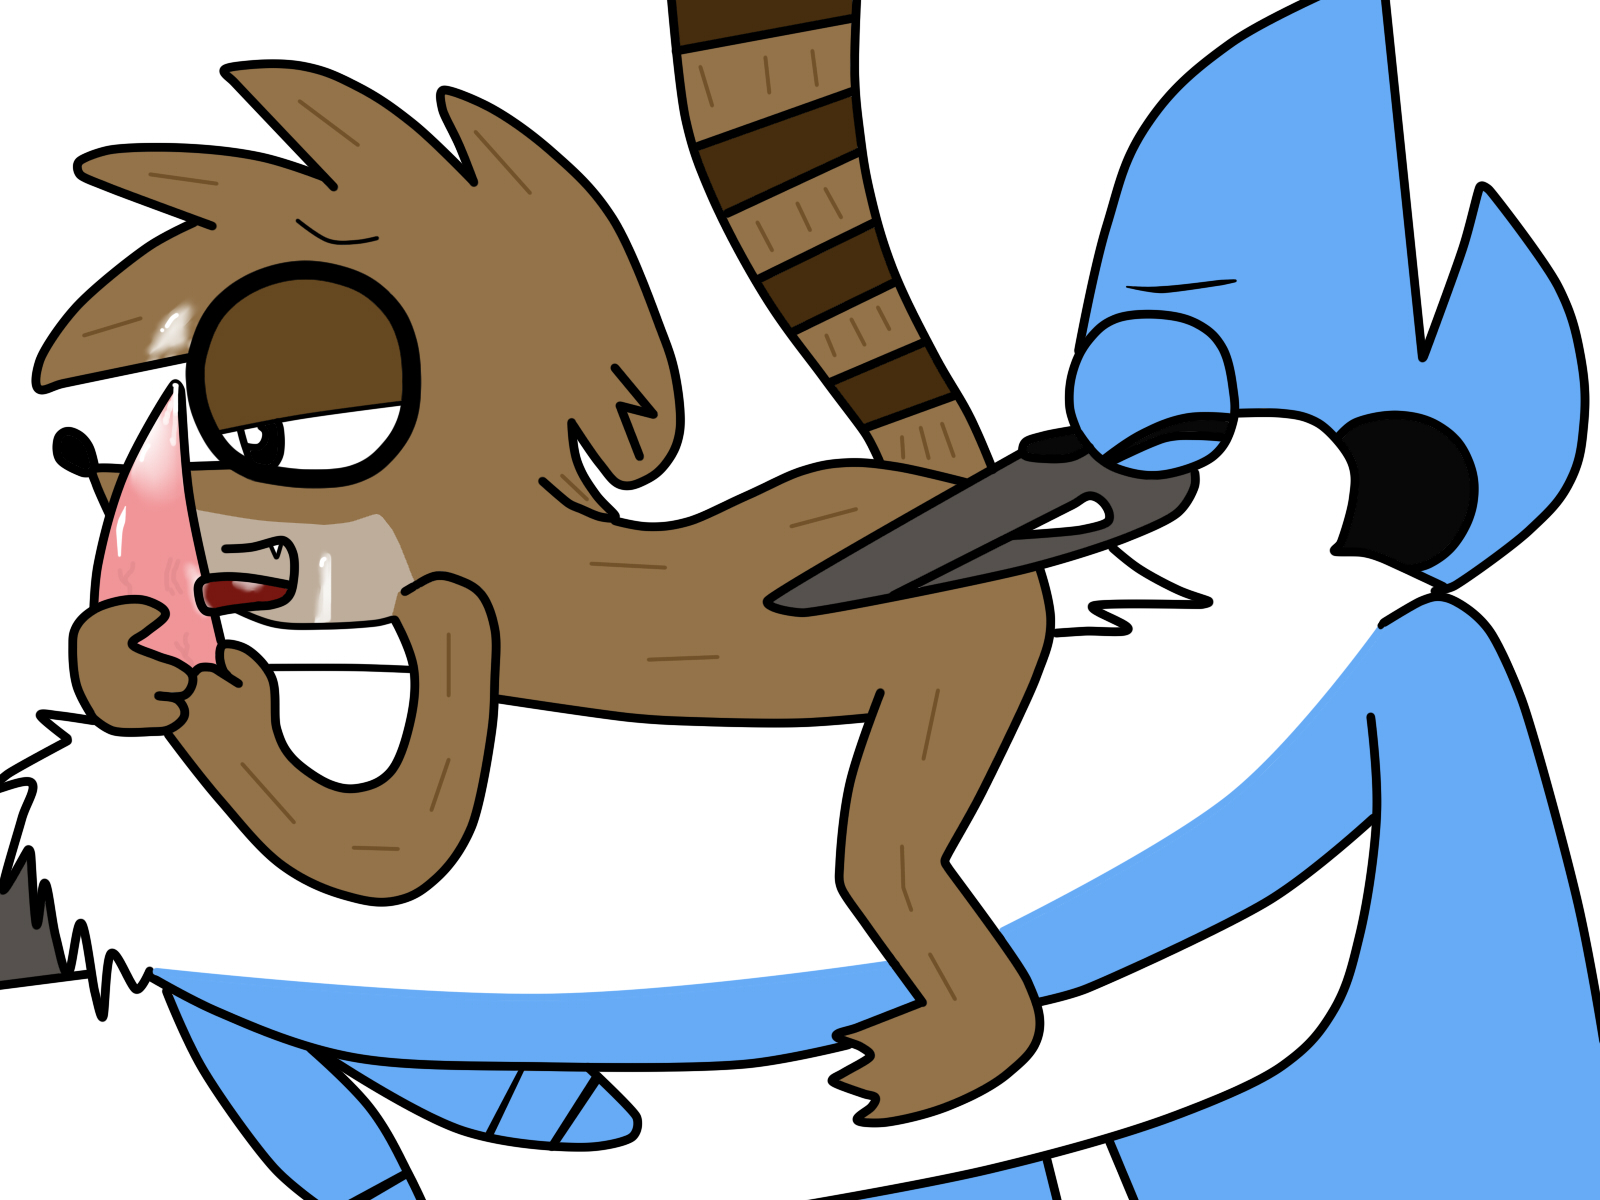 Cj From Regular Show Porn - Mordecai and cj porn - Adult gallery